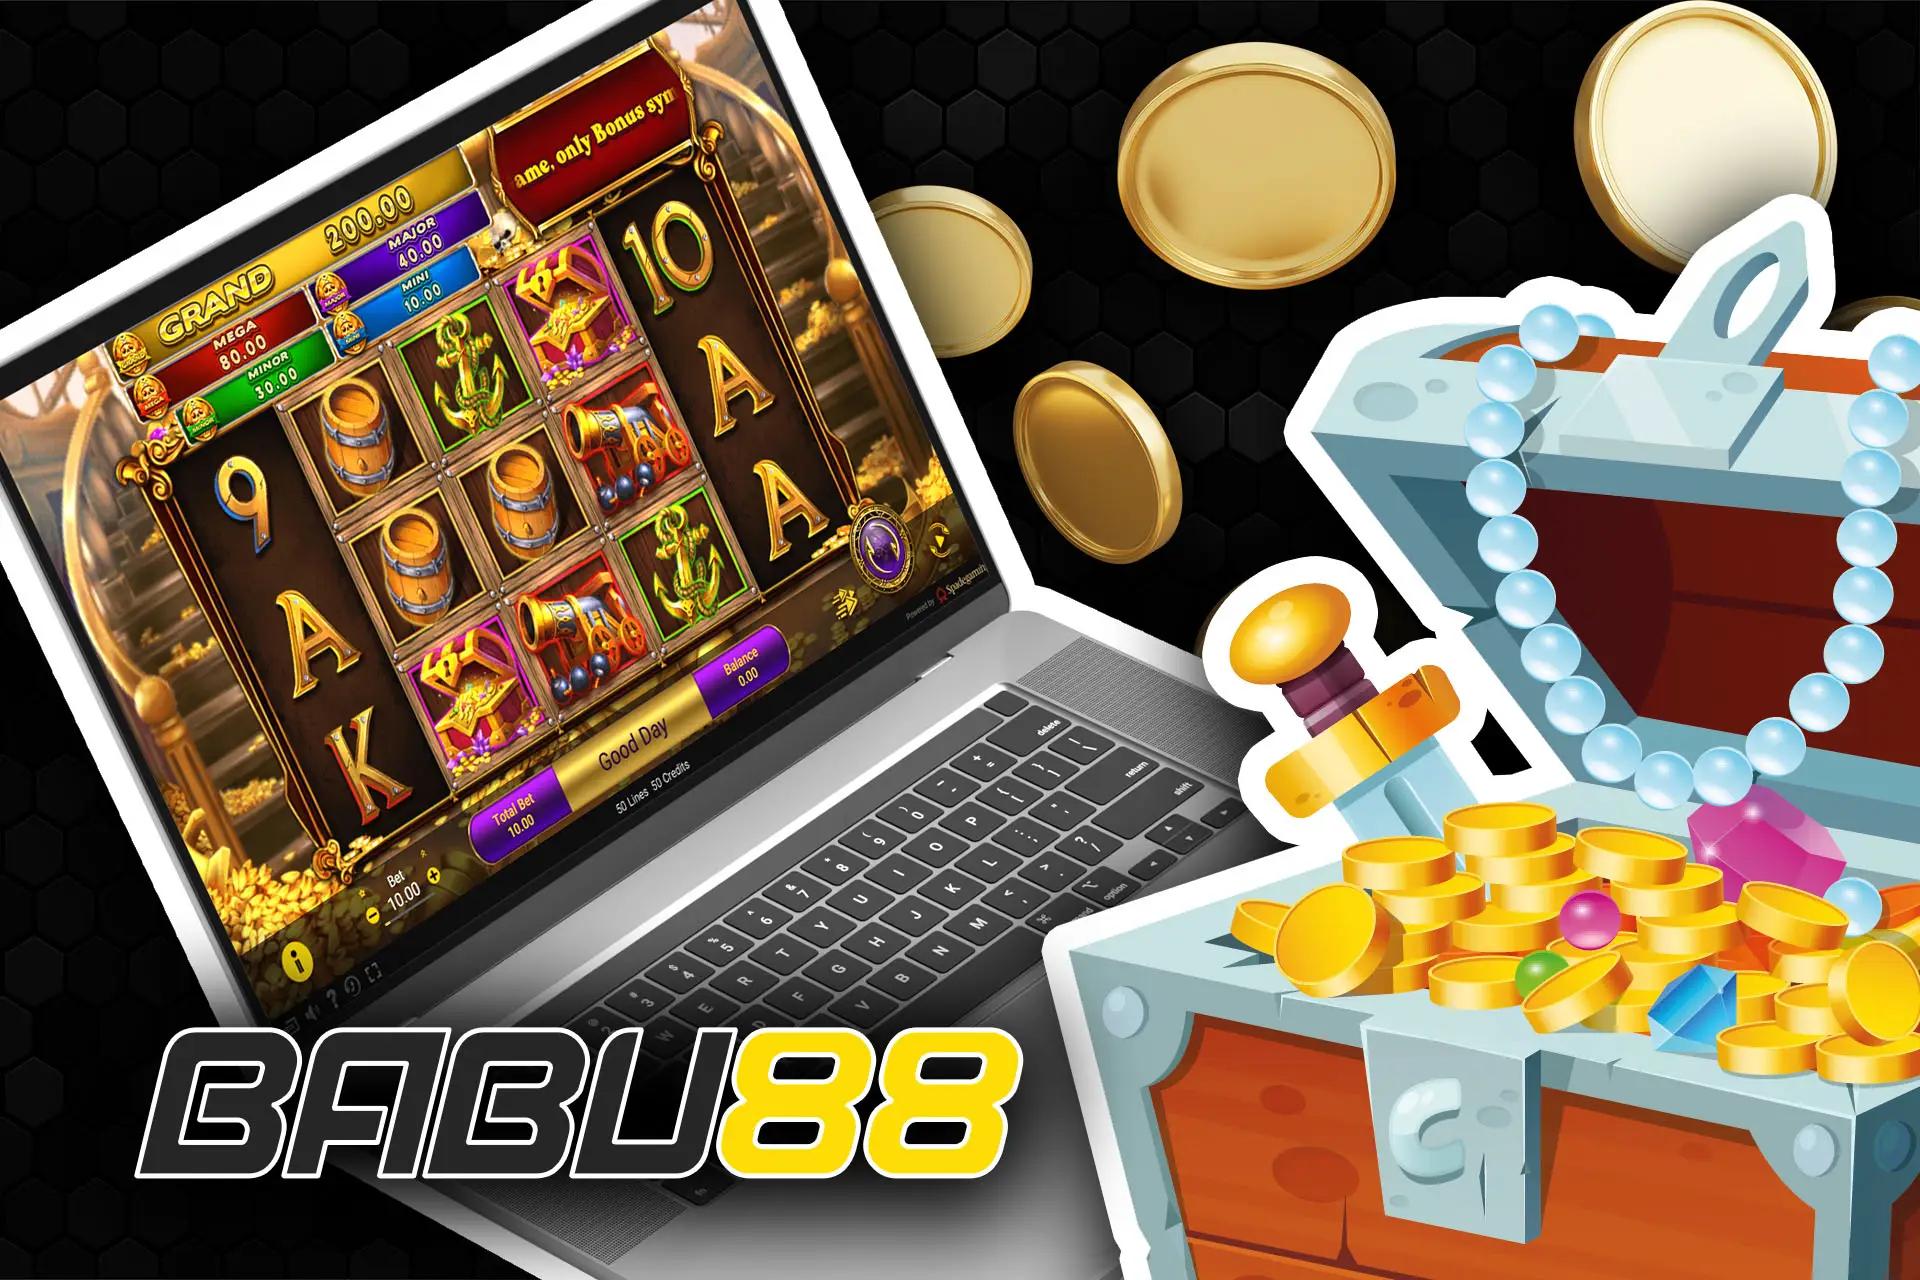 The pirates-themed game on the Babu88 casino.